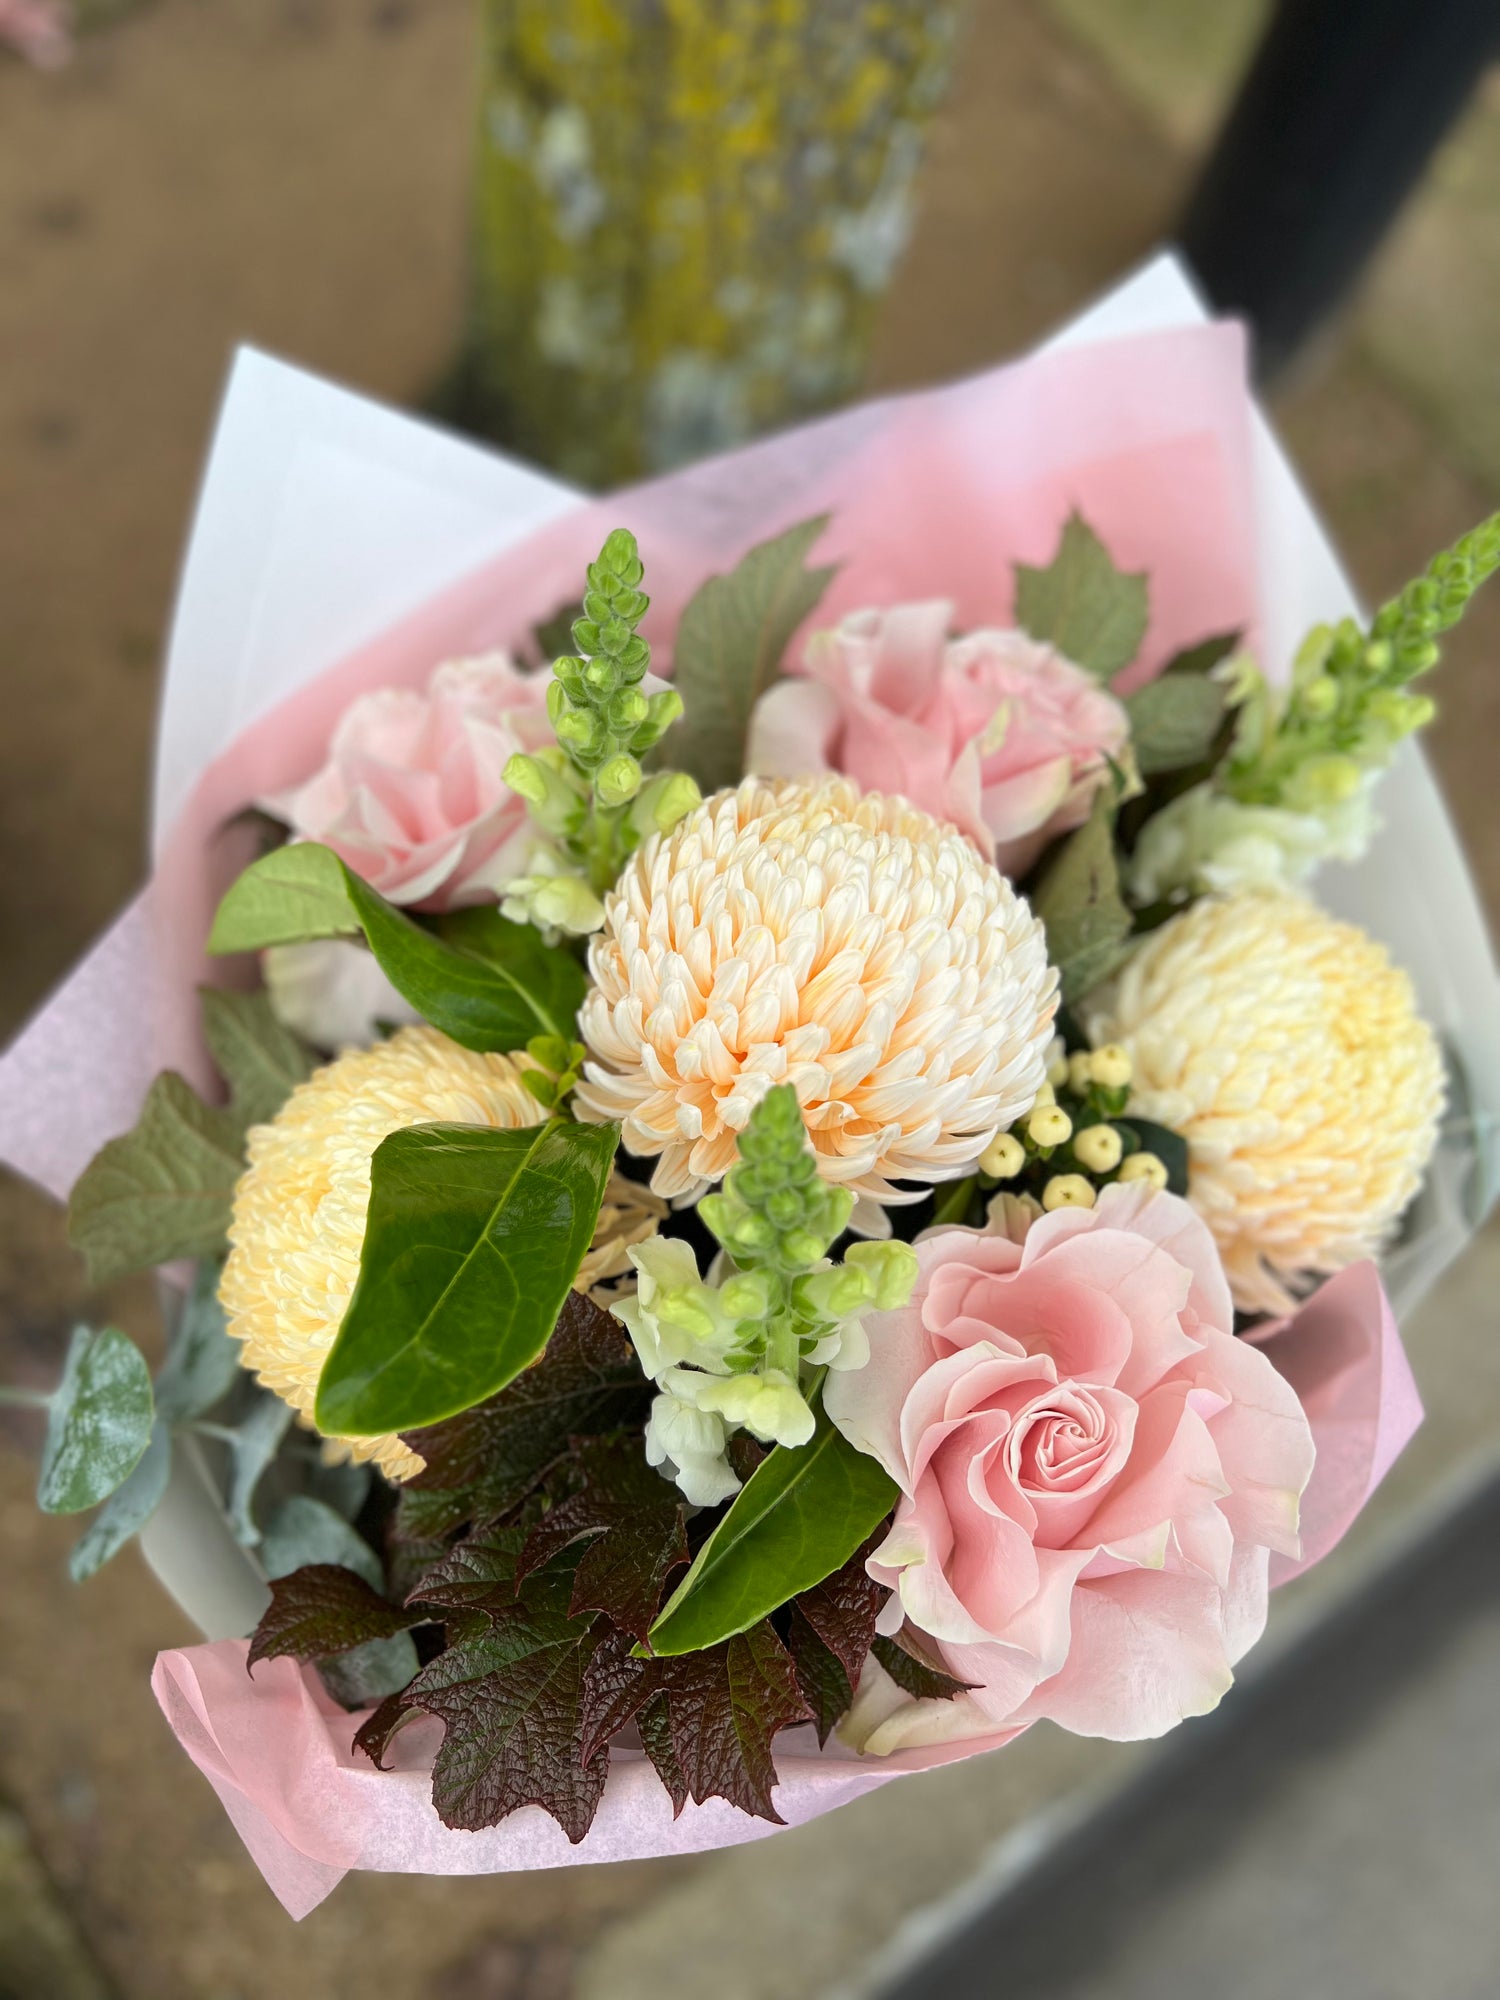 pastel pink bouquet of flowers roses delivery across Mornington Peninsula Mornington Mount Eliza florist birthday flowers anniversary just because sympathy flowers congratulations 